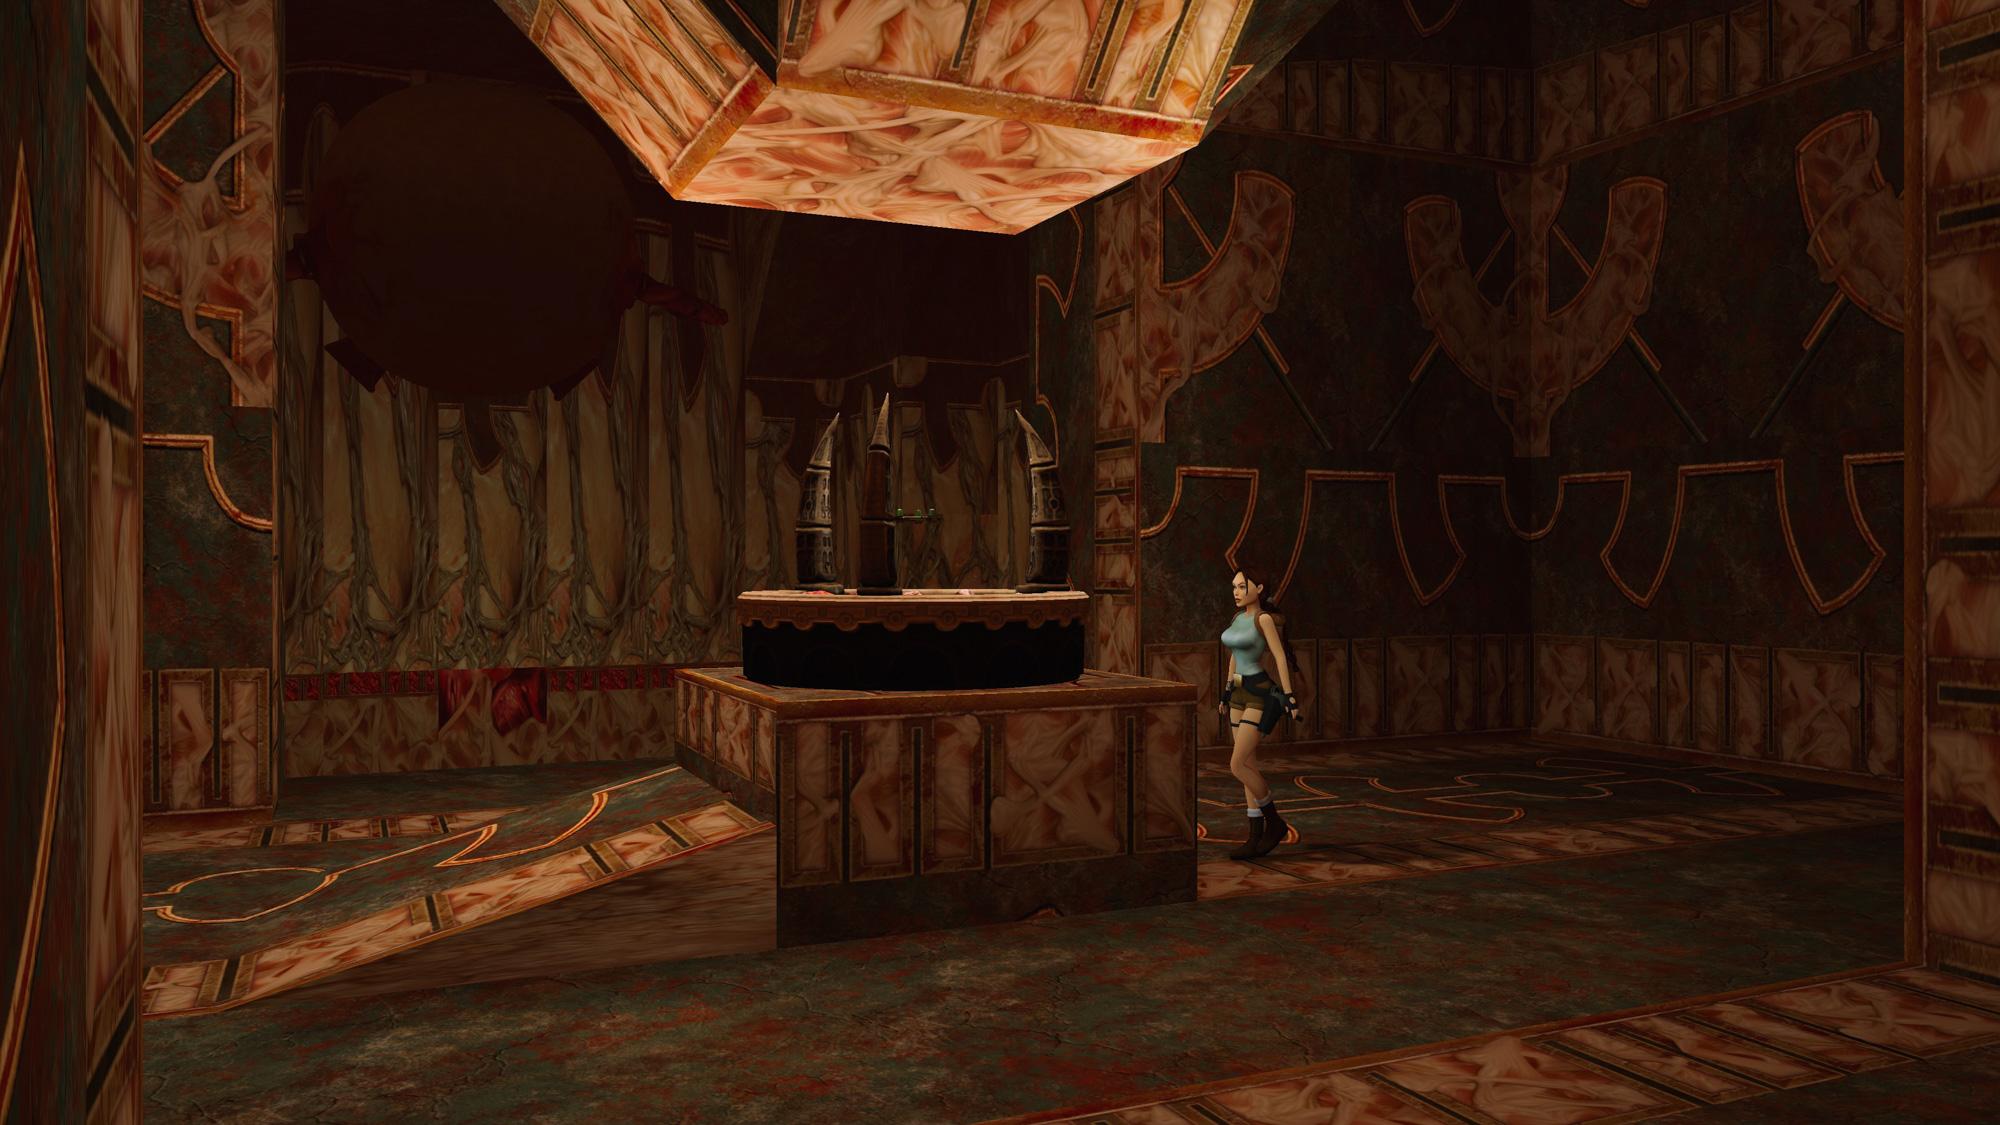 Lara approaches the assembled Scion, which is floating on the pedestal in Atlantis